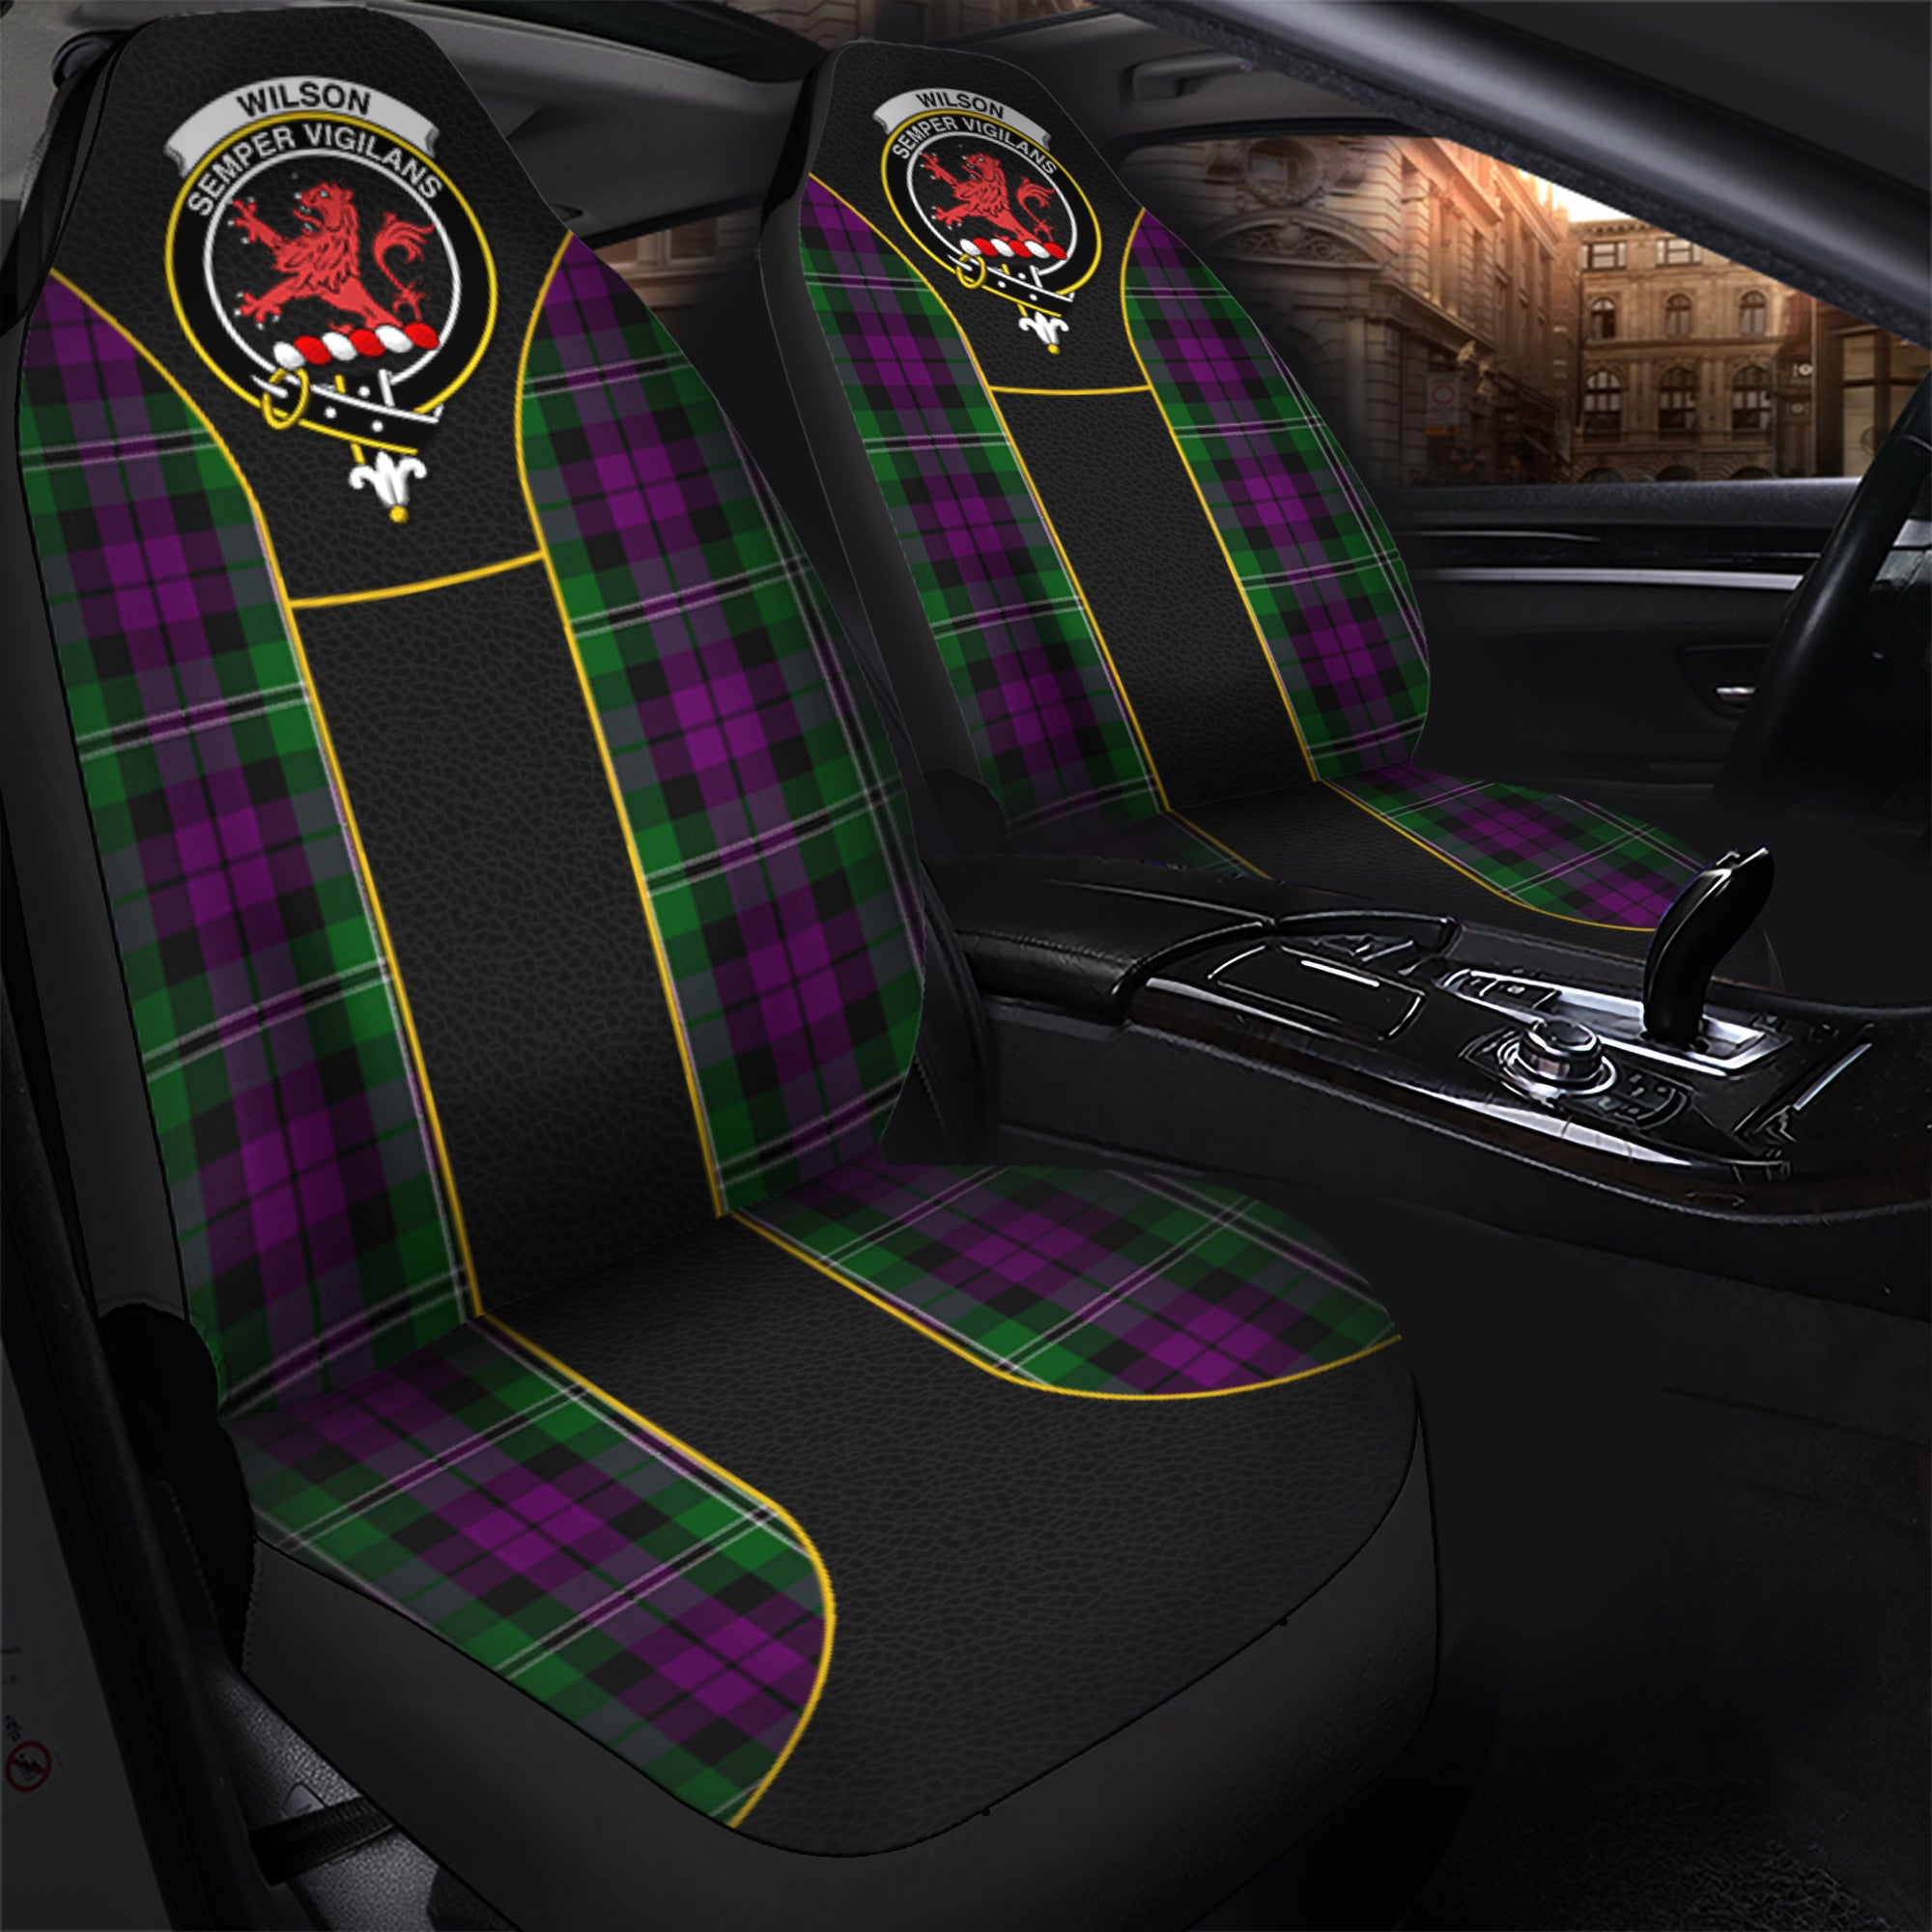 scottish-wilson-tartan-crest-car-seat-cover-special-style